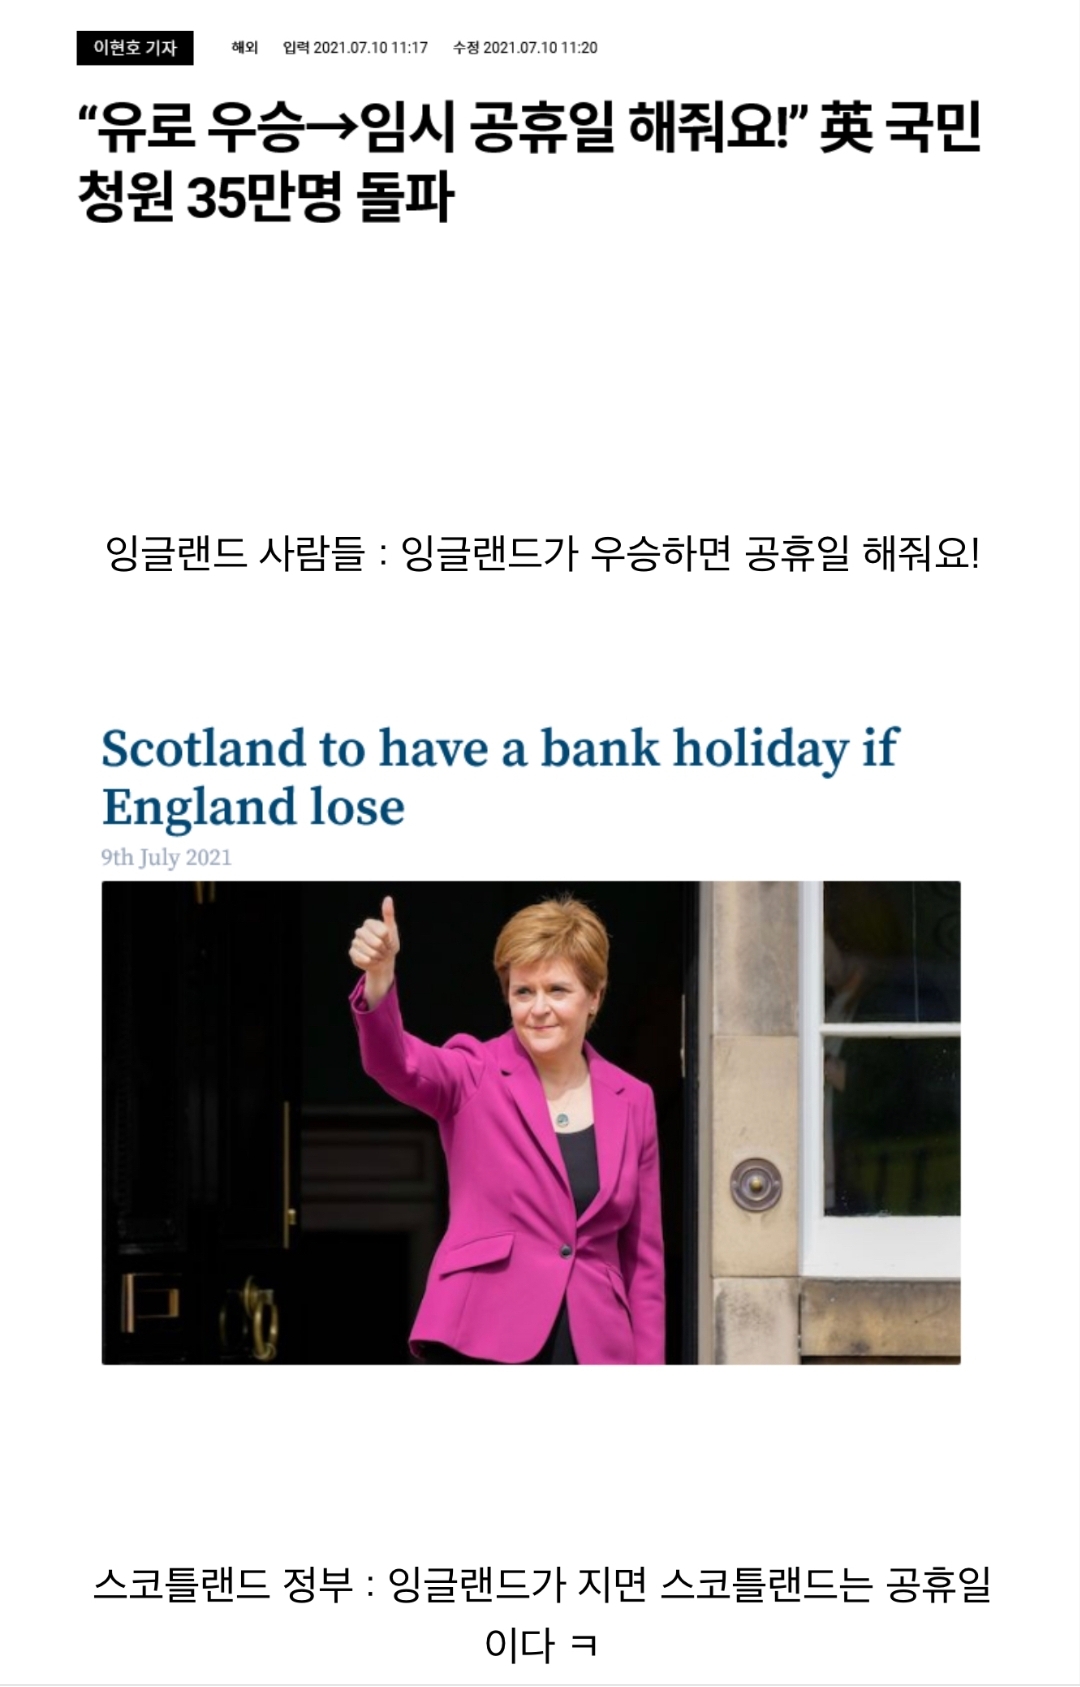 If England win the Euro, a temporary holiday for Scotland.jpg